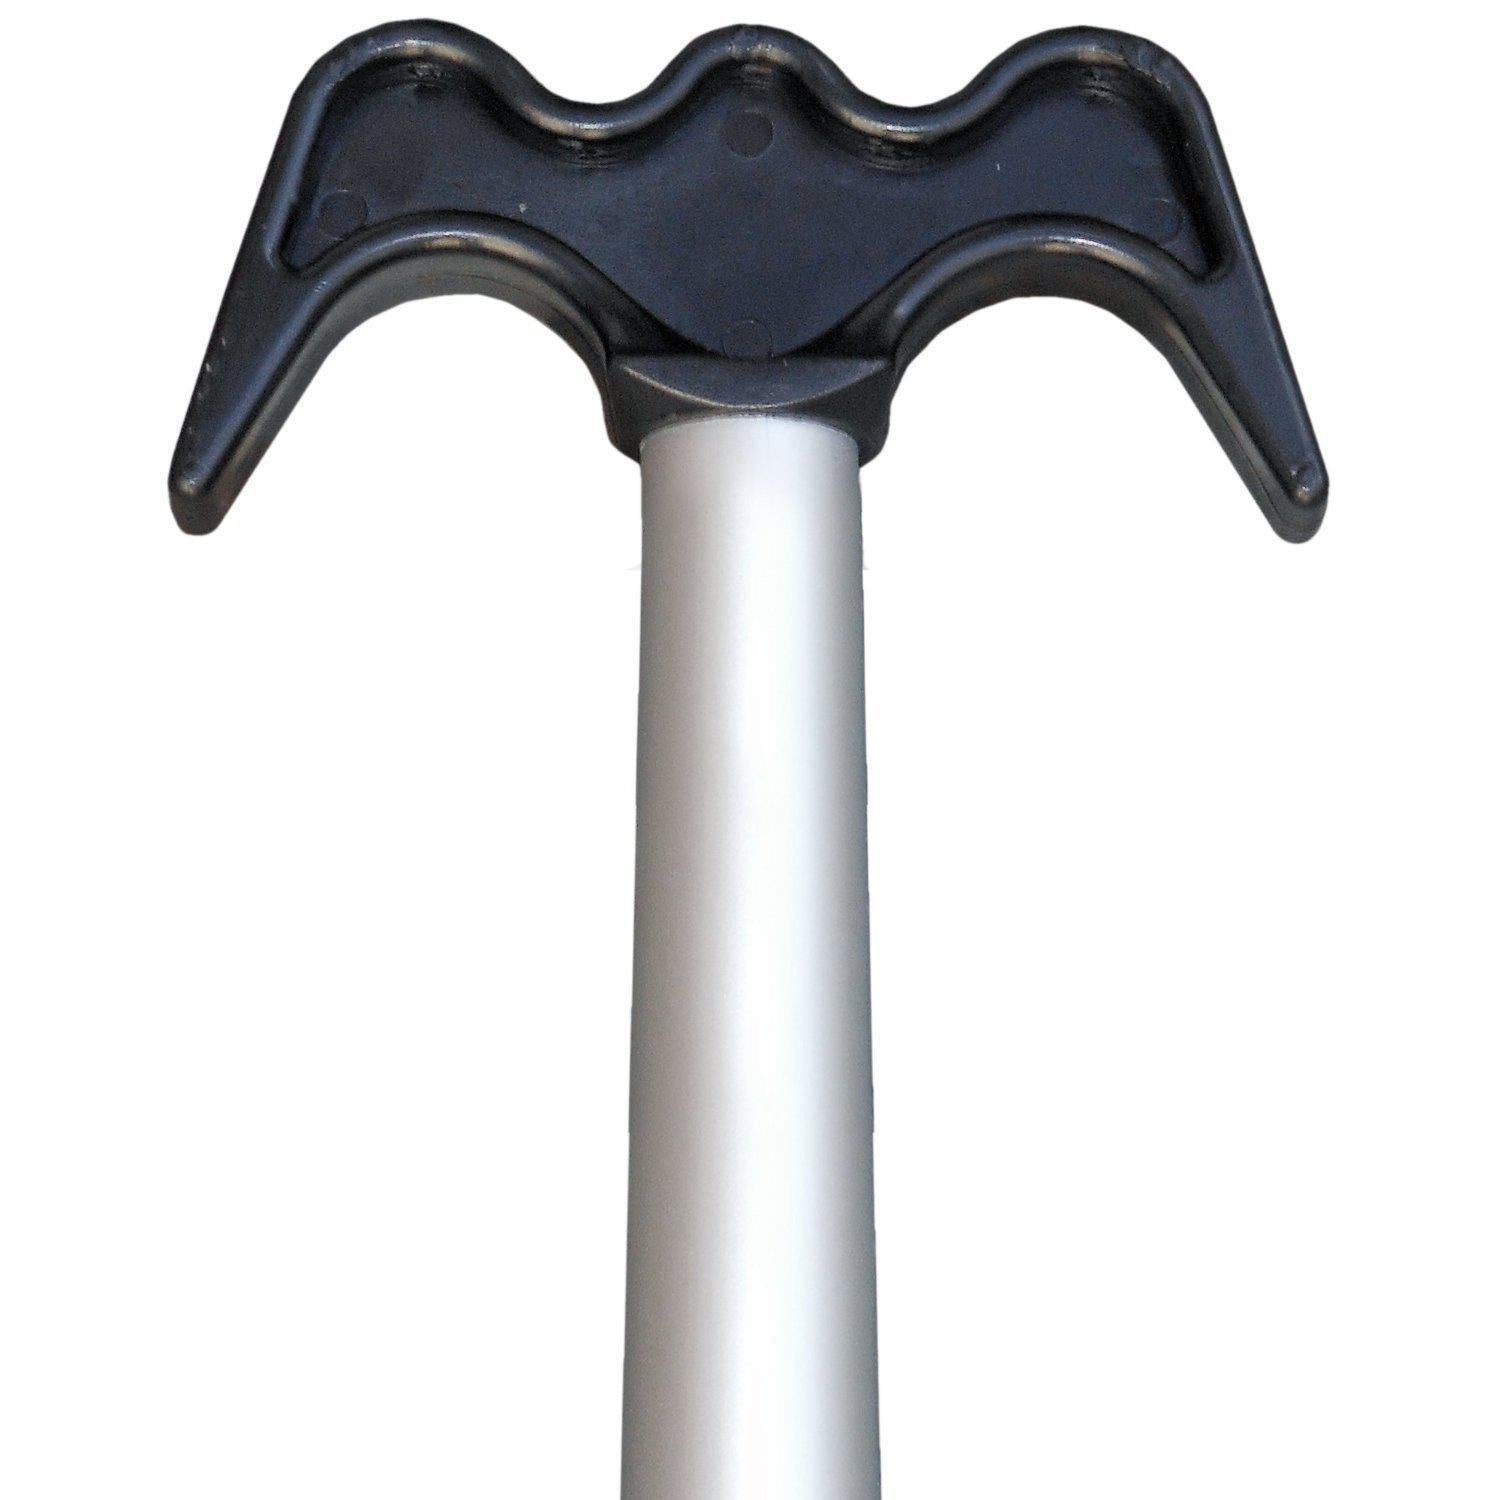 Dual Purpose Paddle and Boat Hook, Black, 4ft (48 inches - 1.2m), Anodized Aluminum Shaft, Reinforced ABS Plastic Blade & Hook, Lightweigh-Canadian Marine &amp; Outdoor Equipment